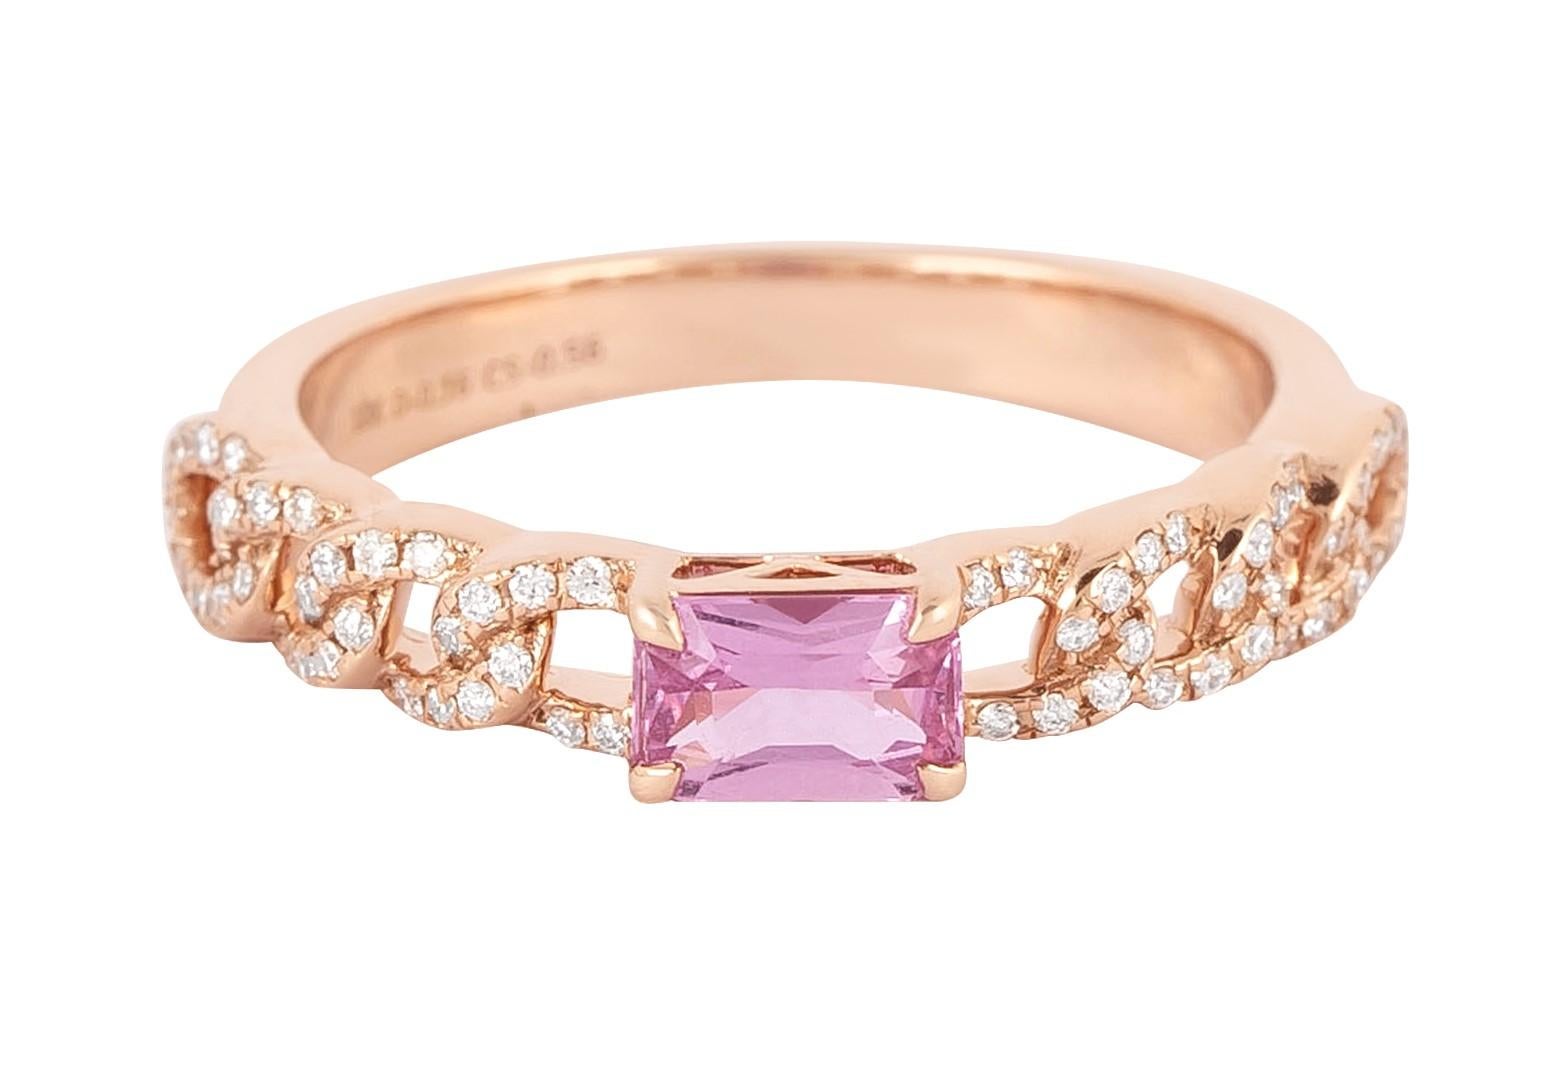 Emerald Cut 18 Karat Gold 0.78 Carat Diamond and Pink Sapphire Cocktail Ring  For Sale